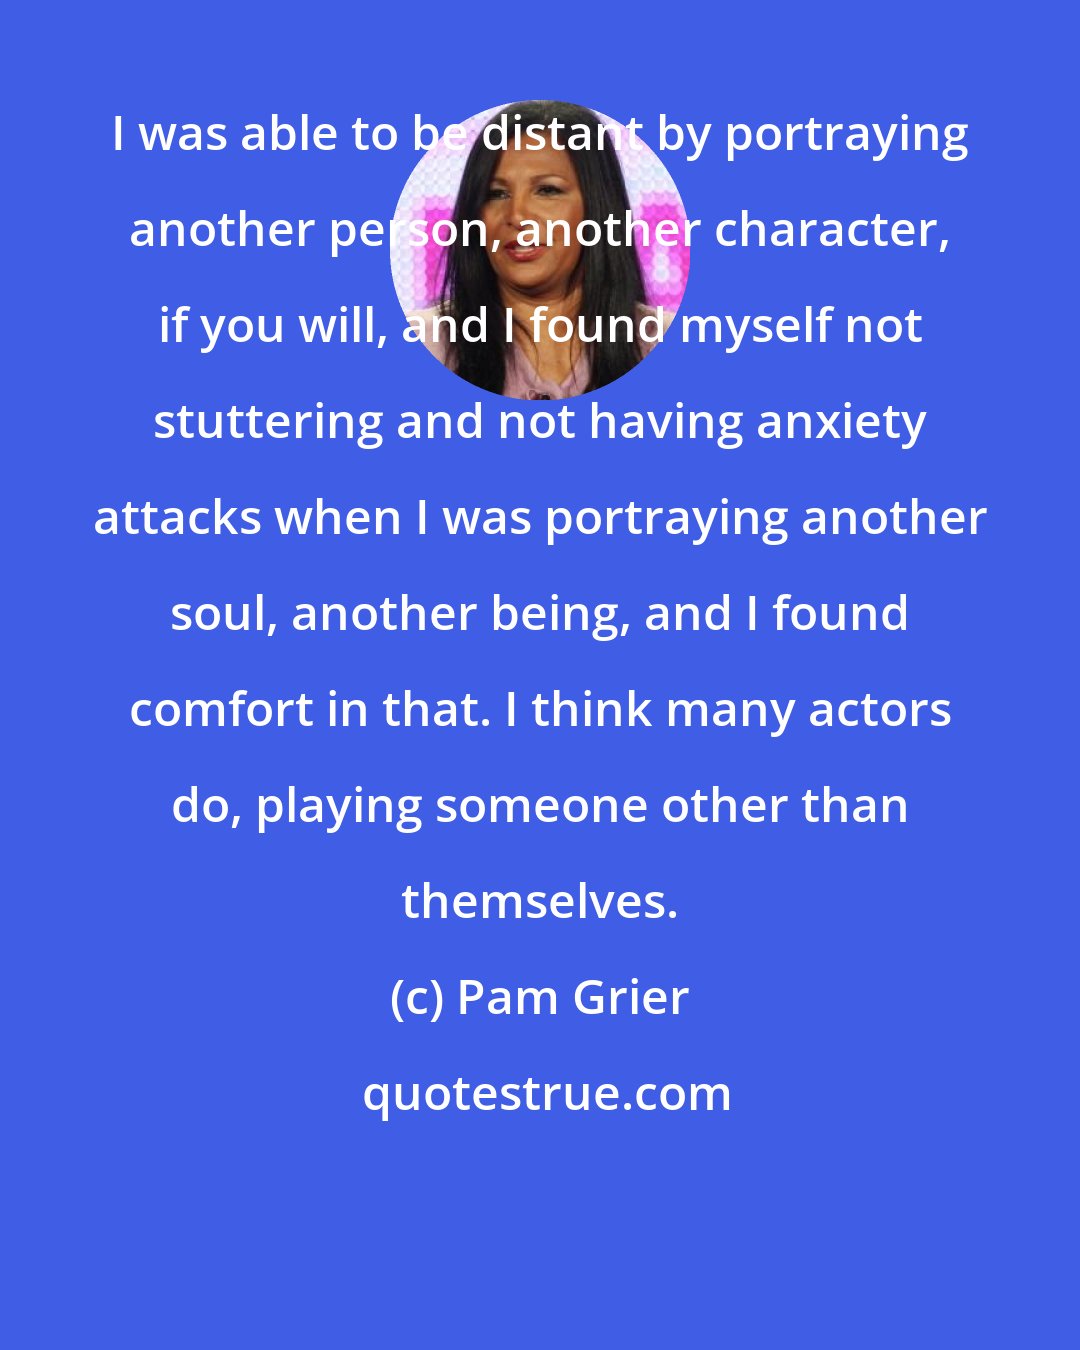 Pam Grier: I was able to be distant by portraying another person, another character, if you will, and I found myself not stuttering and not having anxiety attacks when I was portraying another soul, another being, and I found comfort in that. I think many actors do, playing someone other than themselves.